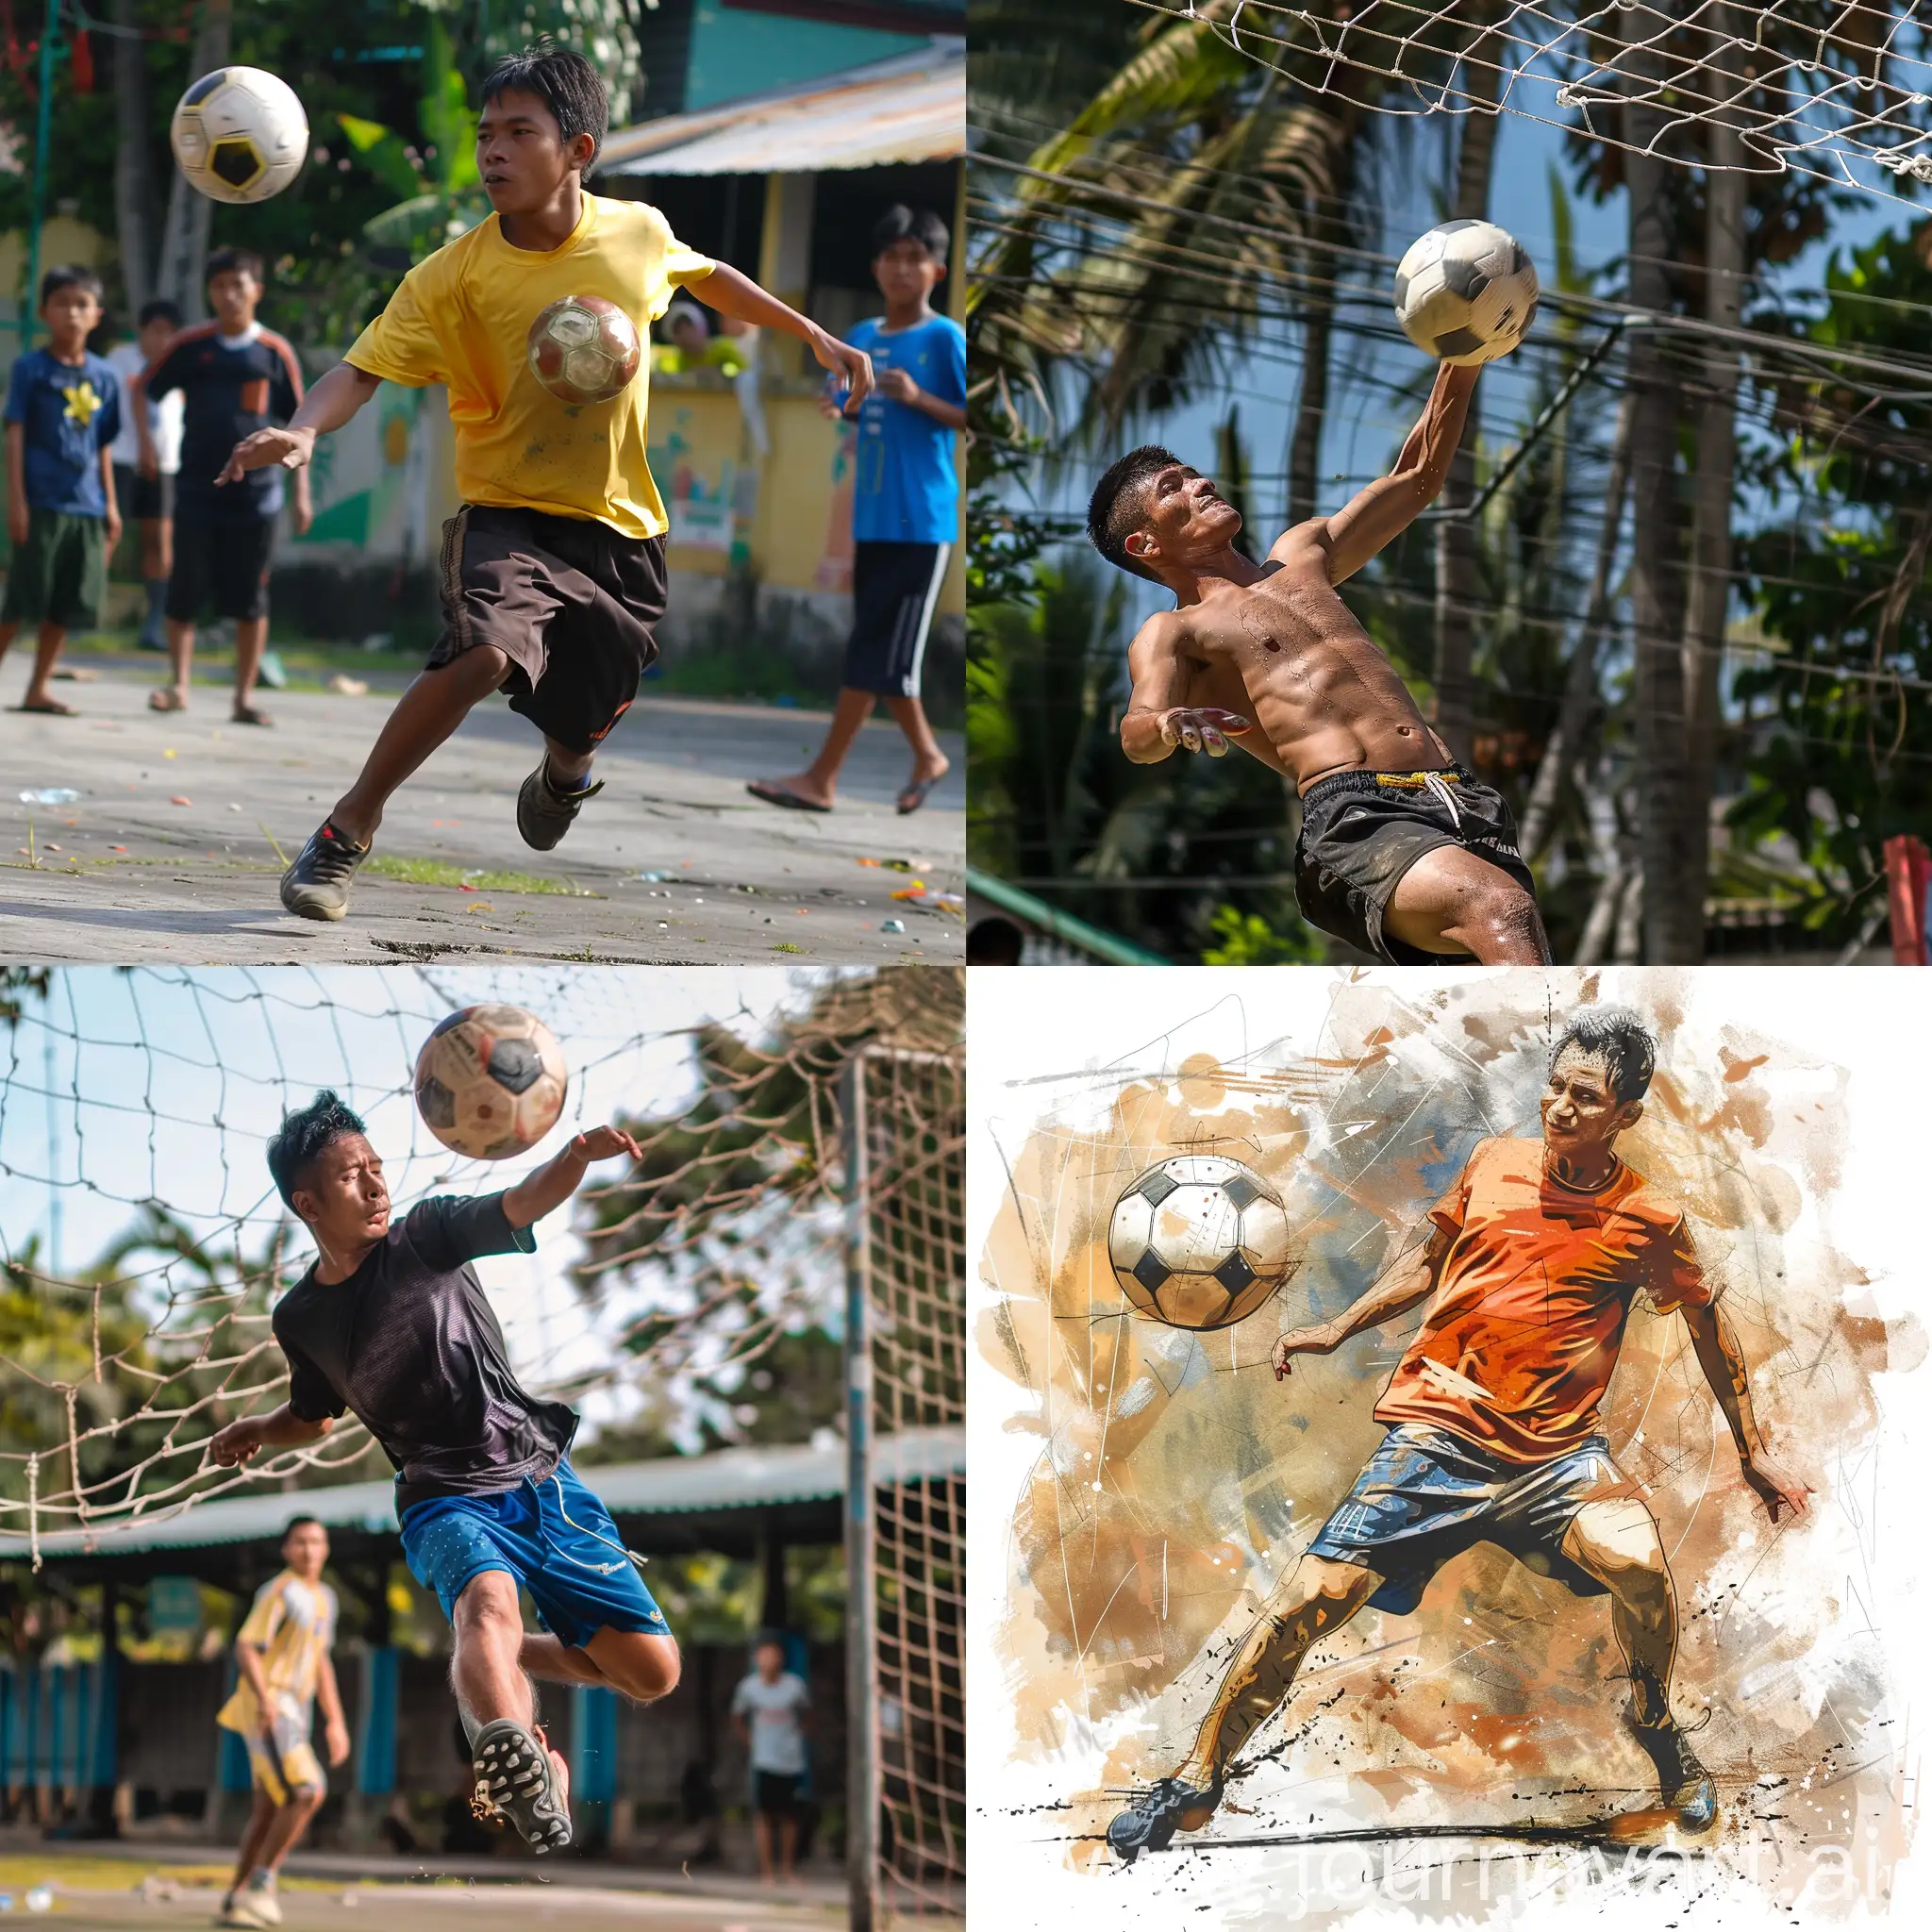 Dynamic-Sepak-Takraw-Match-with-Players-in-Action